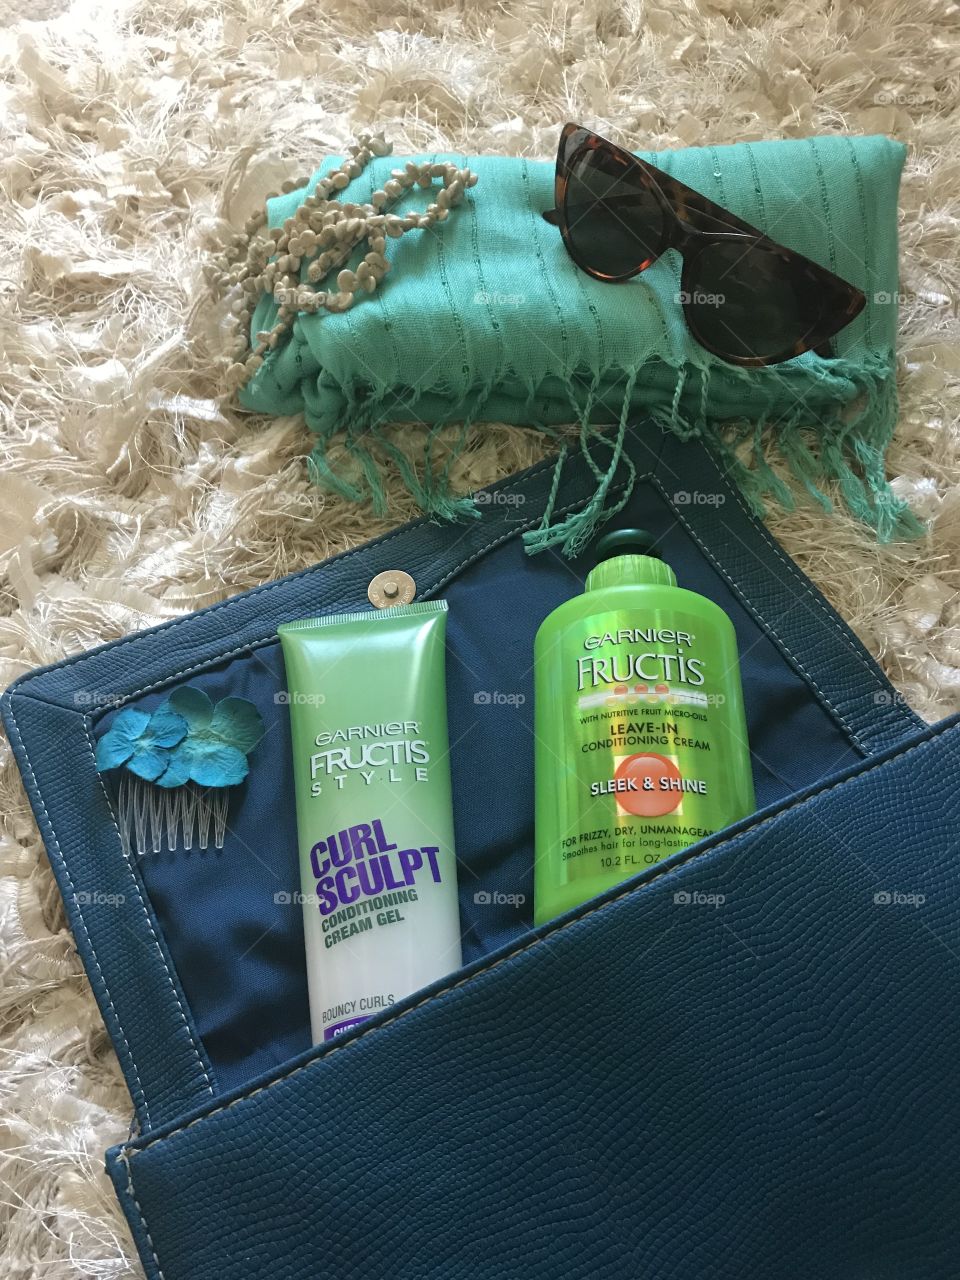 Fructis products in purse